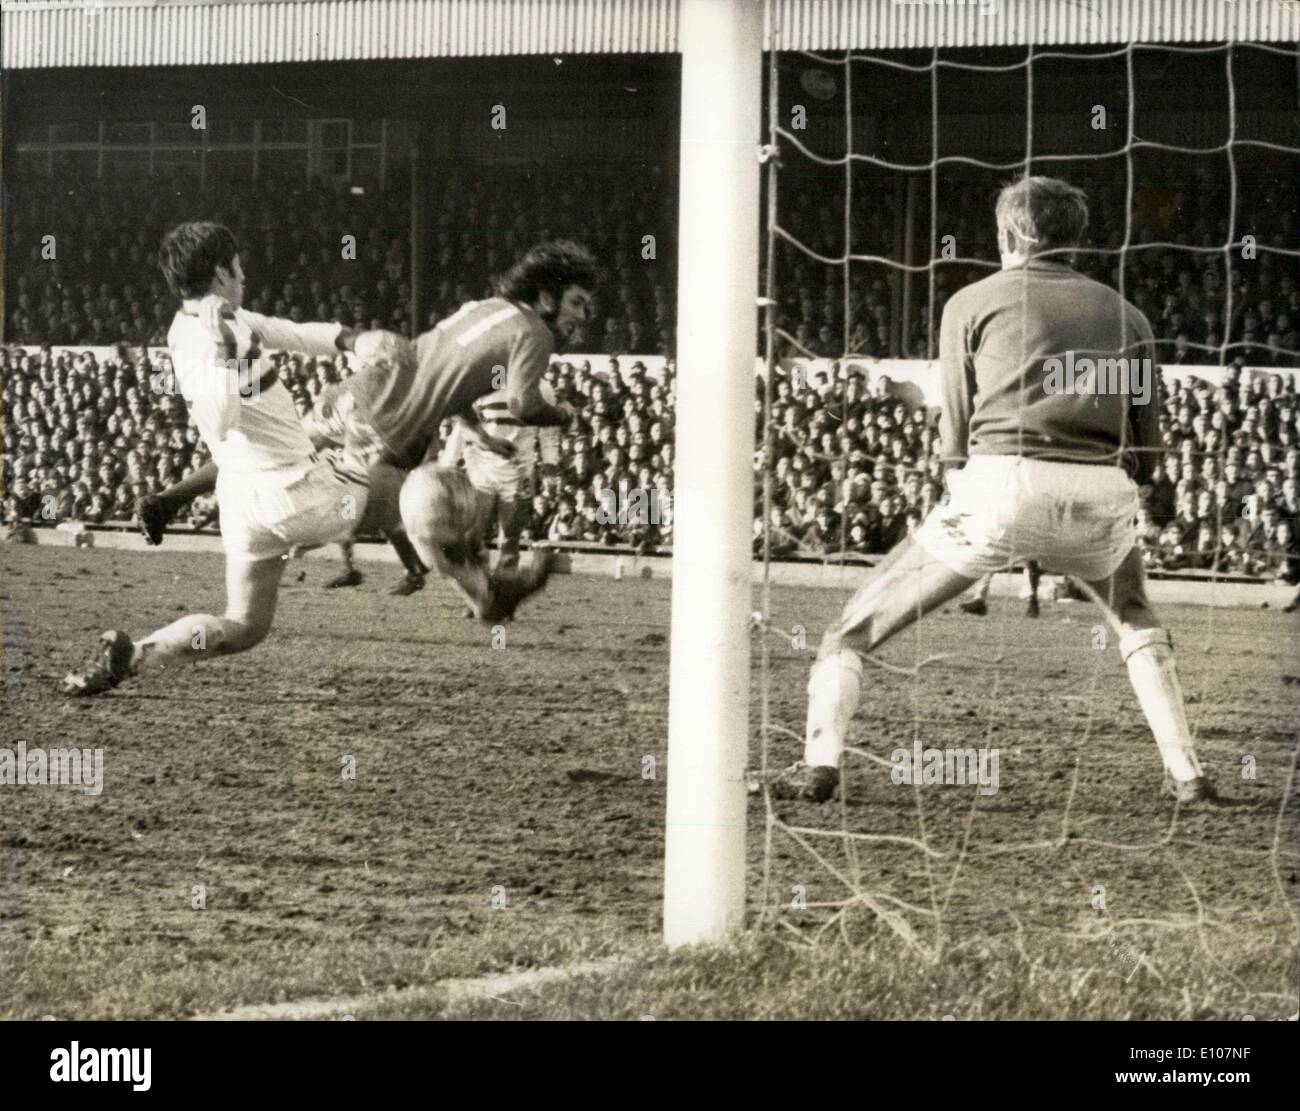 Feb. 09, 1970 - Six Goals for George Best: George Best scored six out of Manchester United's eight goals, when they beat Northampton 8-2 in their F.A. Cup-tie match on Saturday. Photo Shows George Best scoring his sixth goal during Saturday's match. Stock Photo